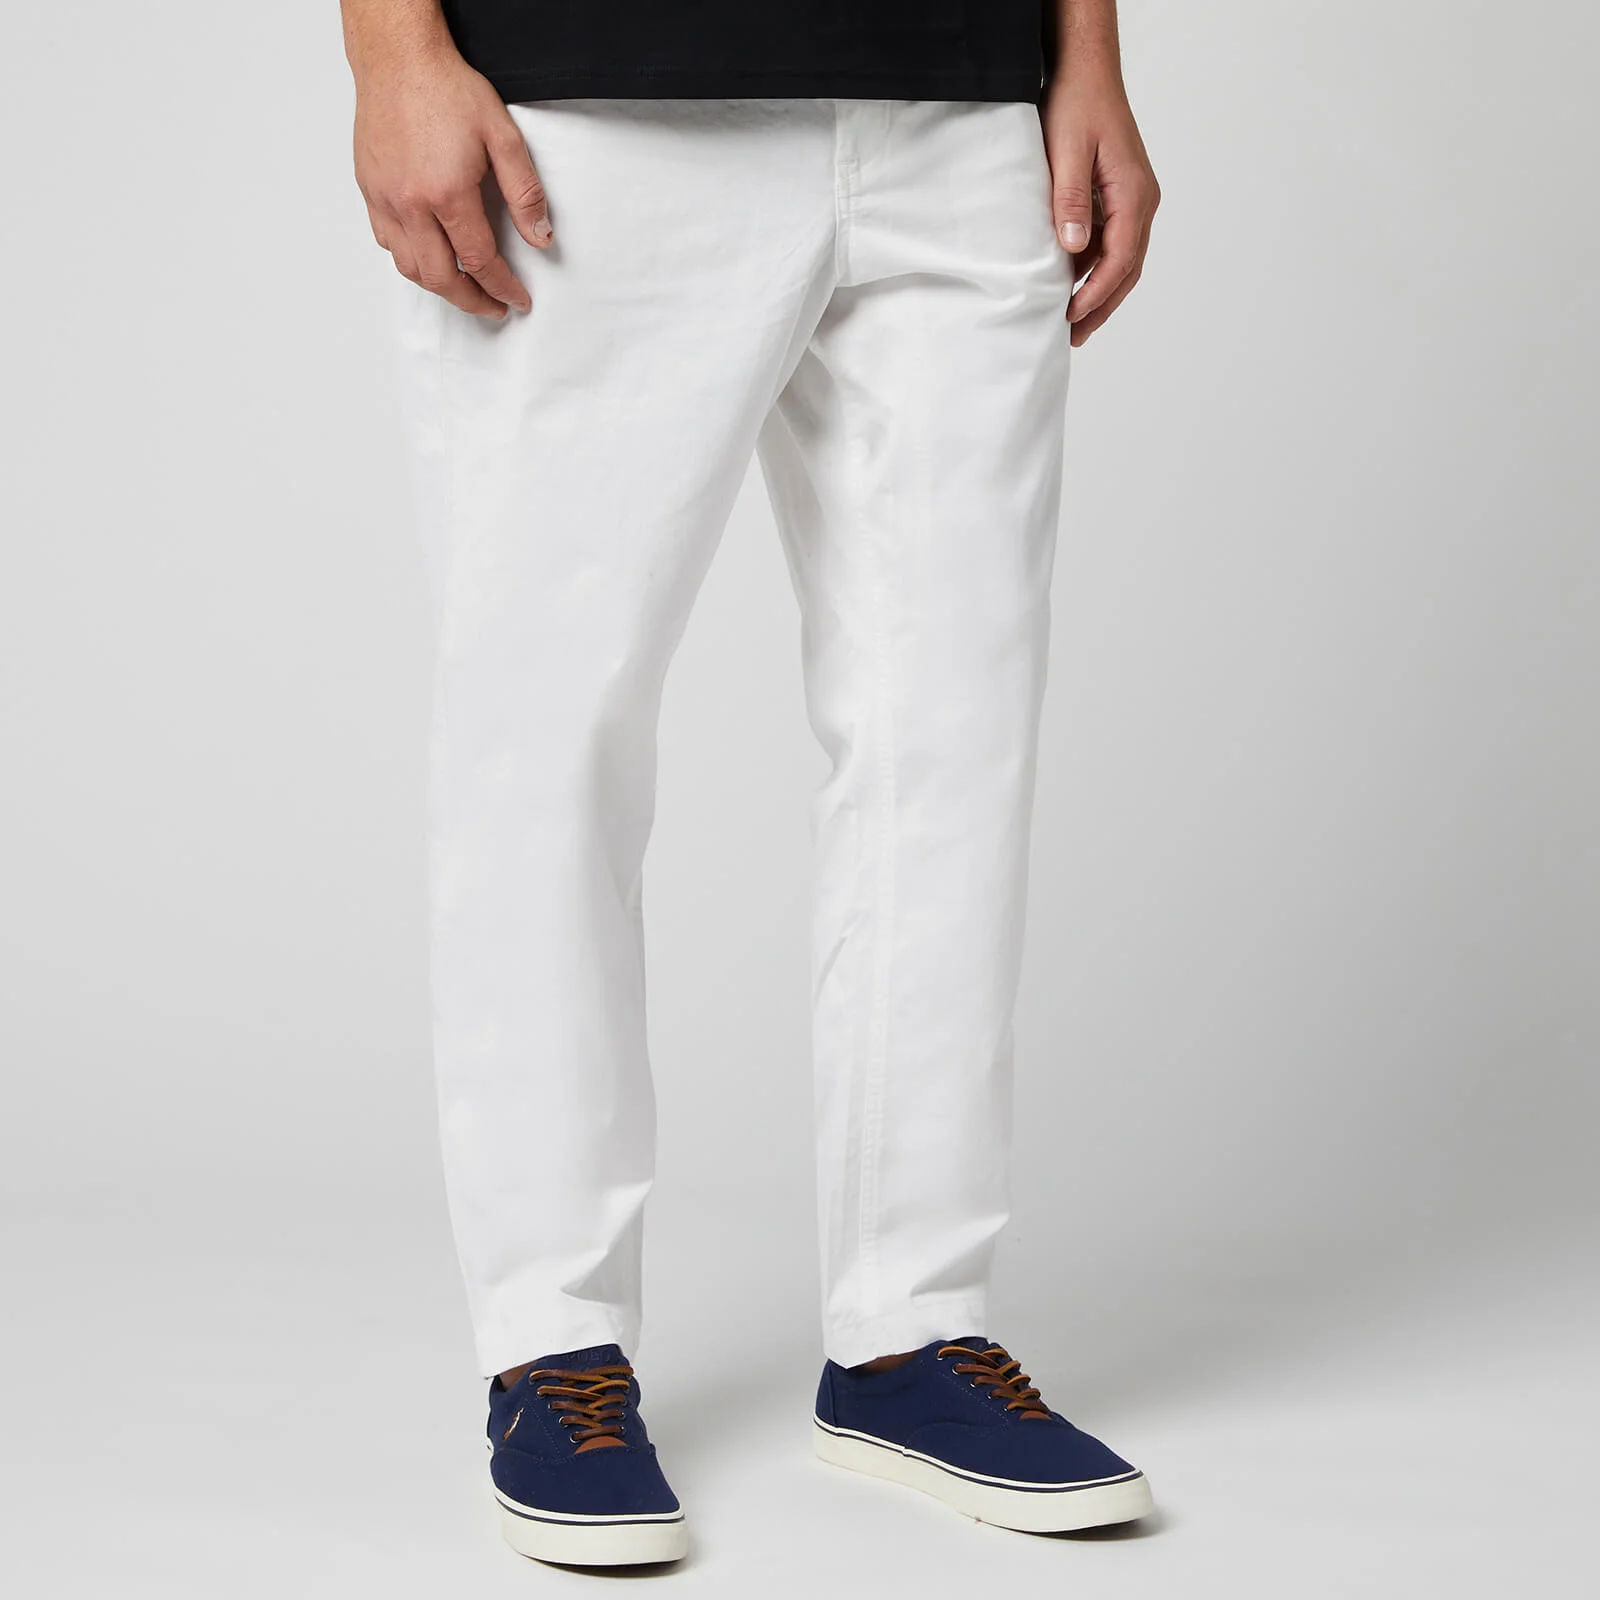 Polo Ralph Lauren Men's Tapered Fit Prepster Trousers - White Image 1